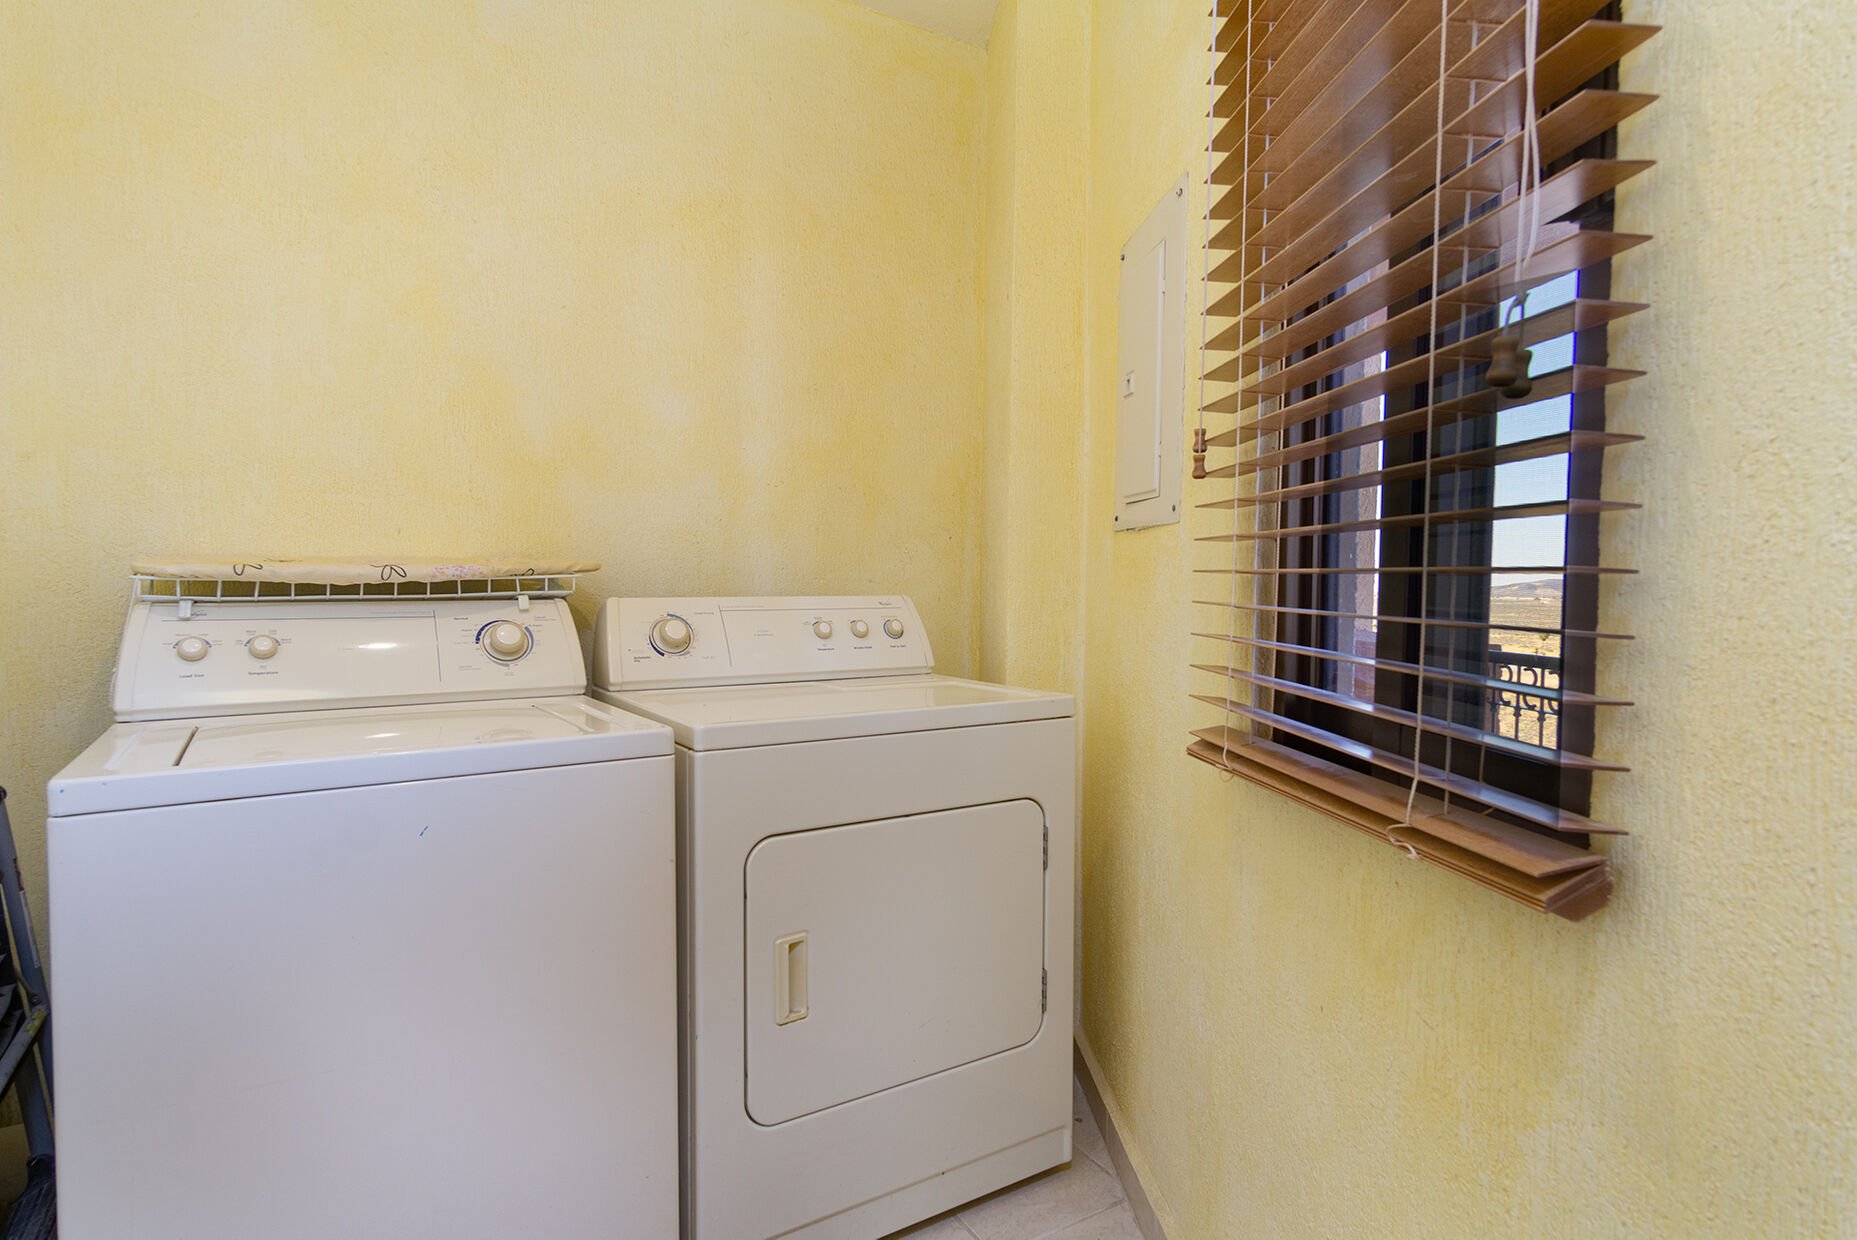 laundry room with Washer and dryer